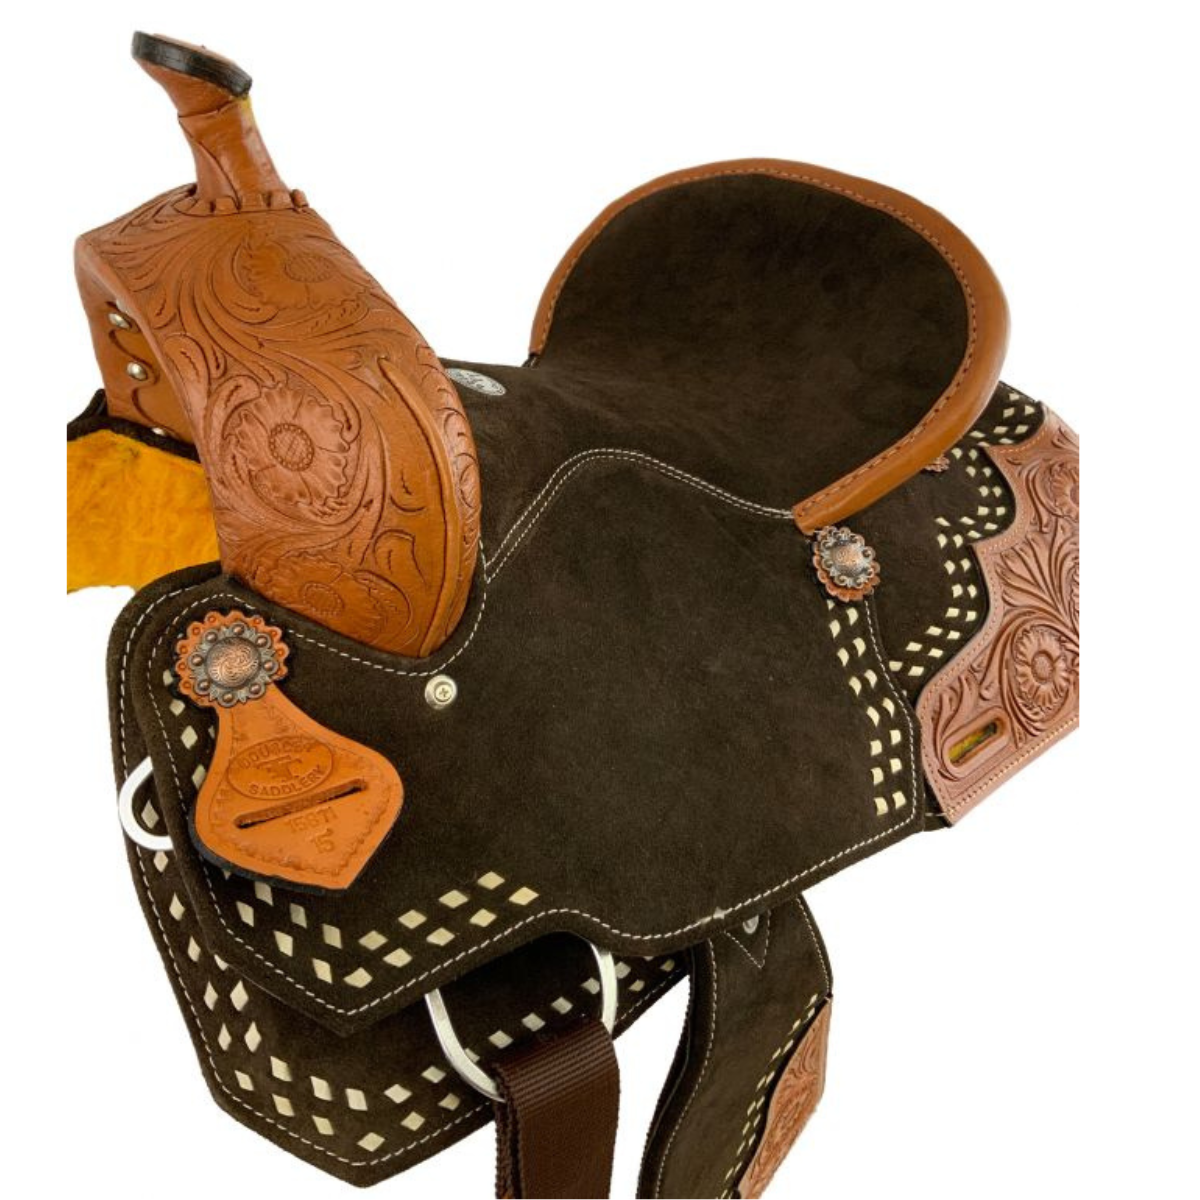 15" Double T Brown Suede Barrel Saddle With Floral Tooling and White Buckstitching. - Double T Saddles